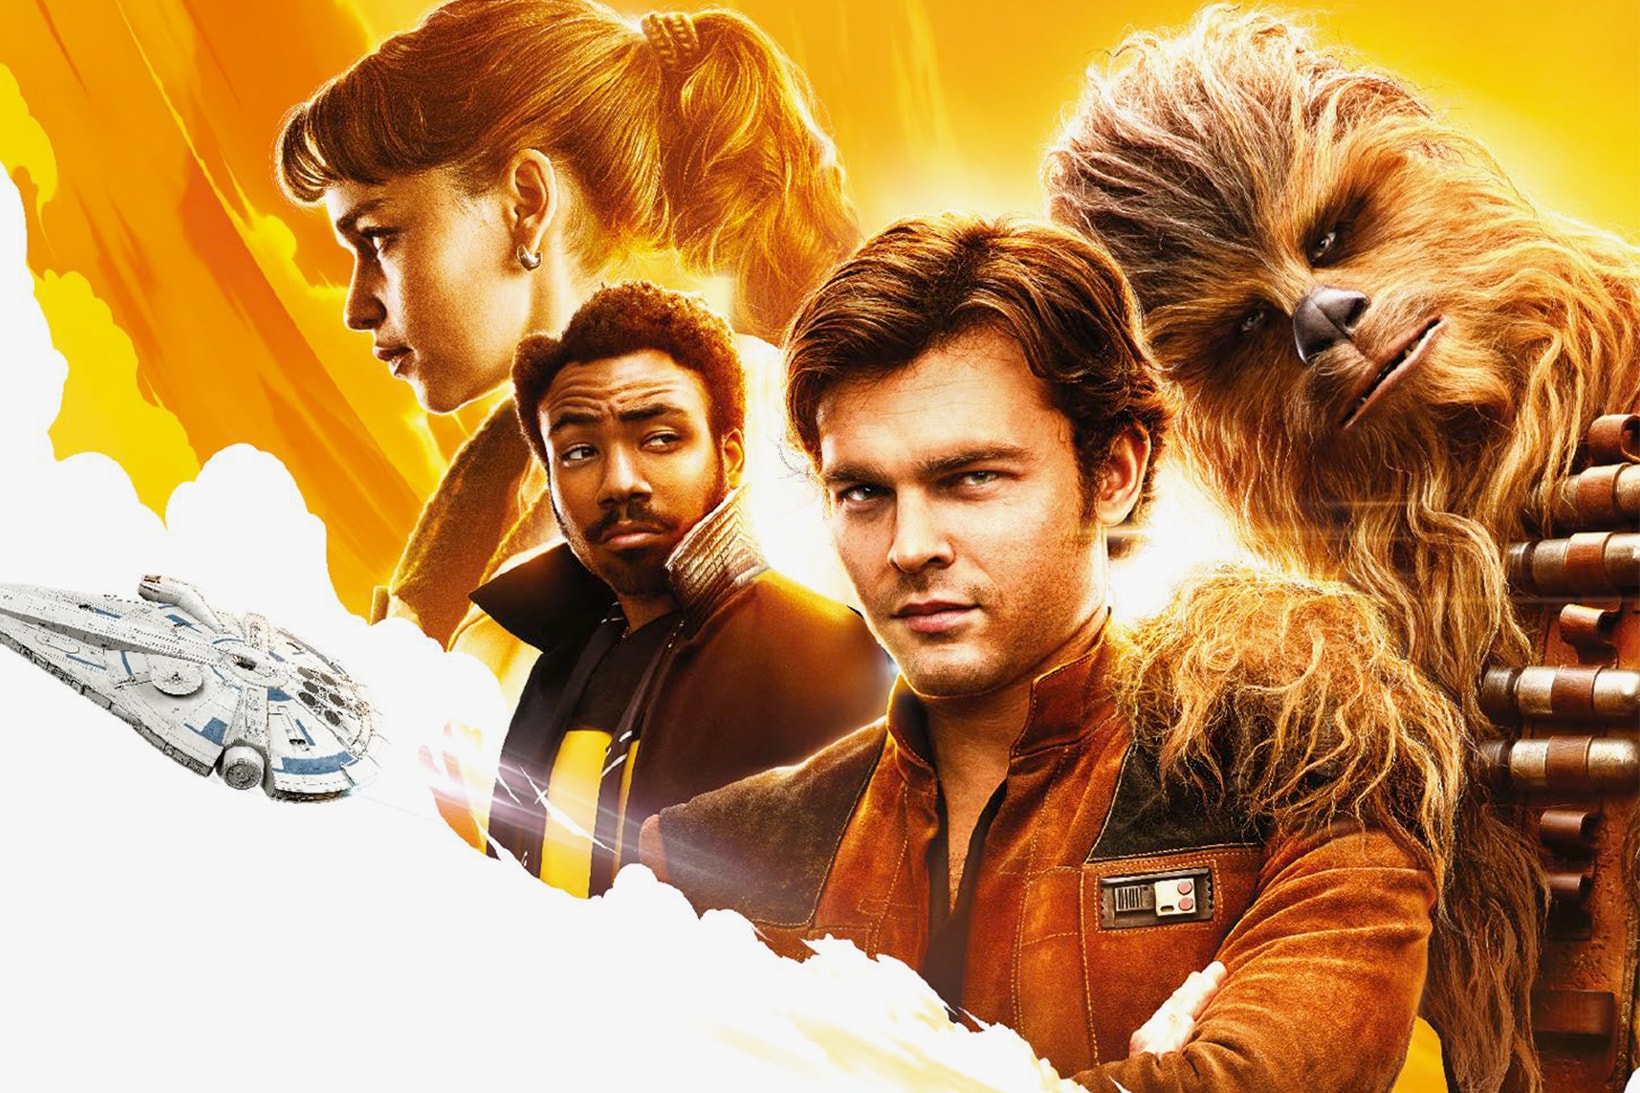 Solo A Star Wars Story Character Posters Han Solo Lando Donald Glover Emilia Clarke Chewie Chewbacca